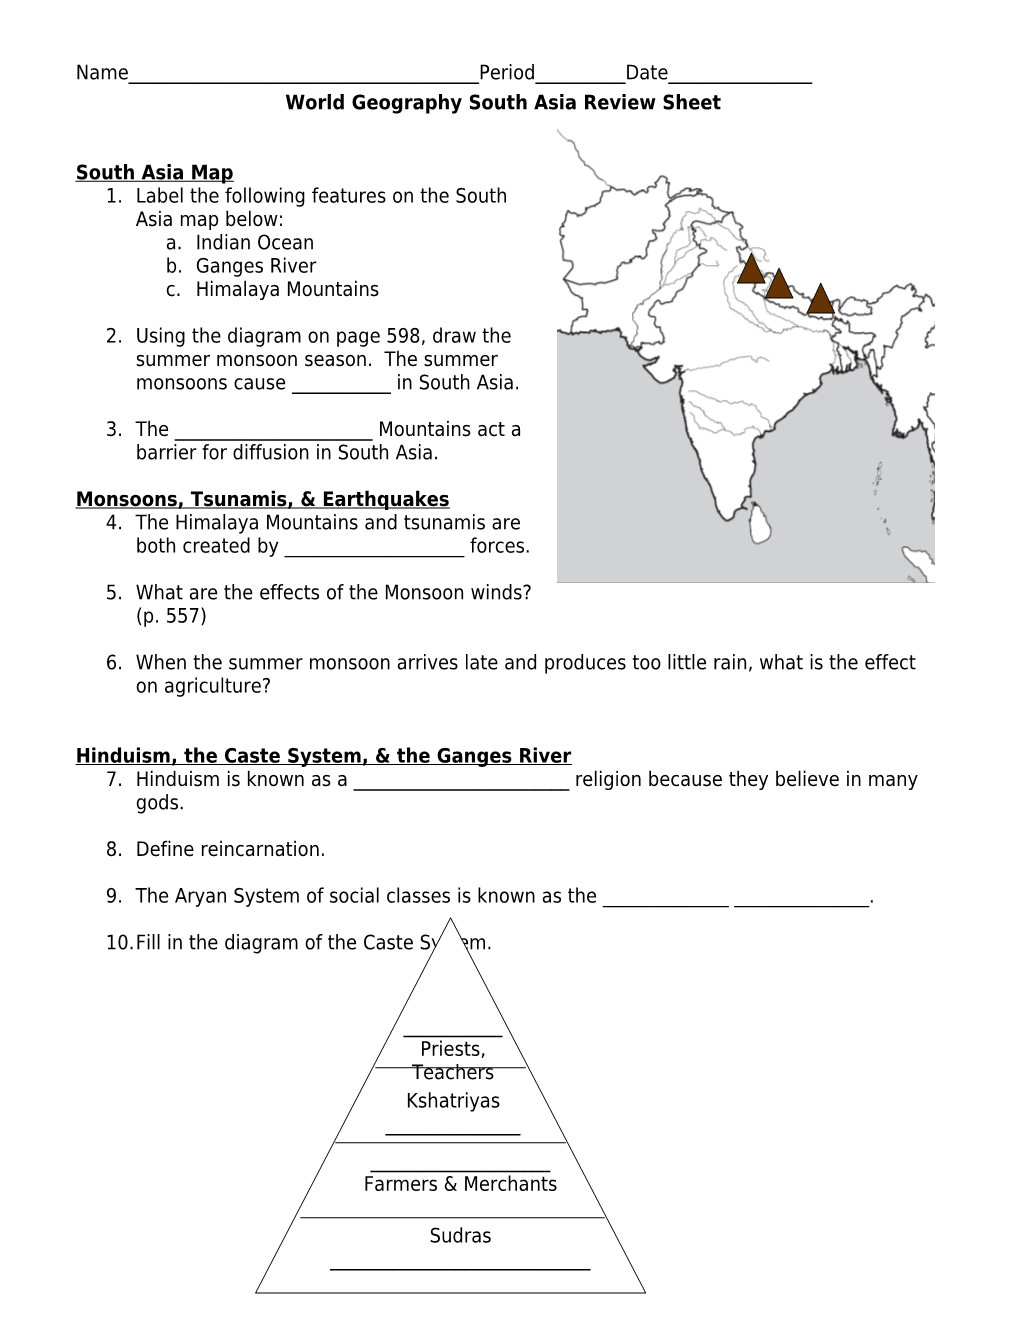 World Geography South Asia Review Sheet